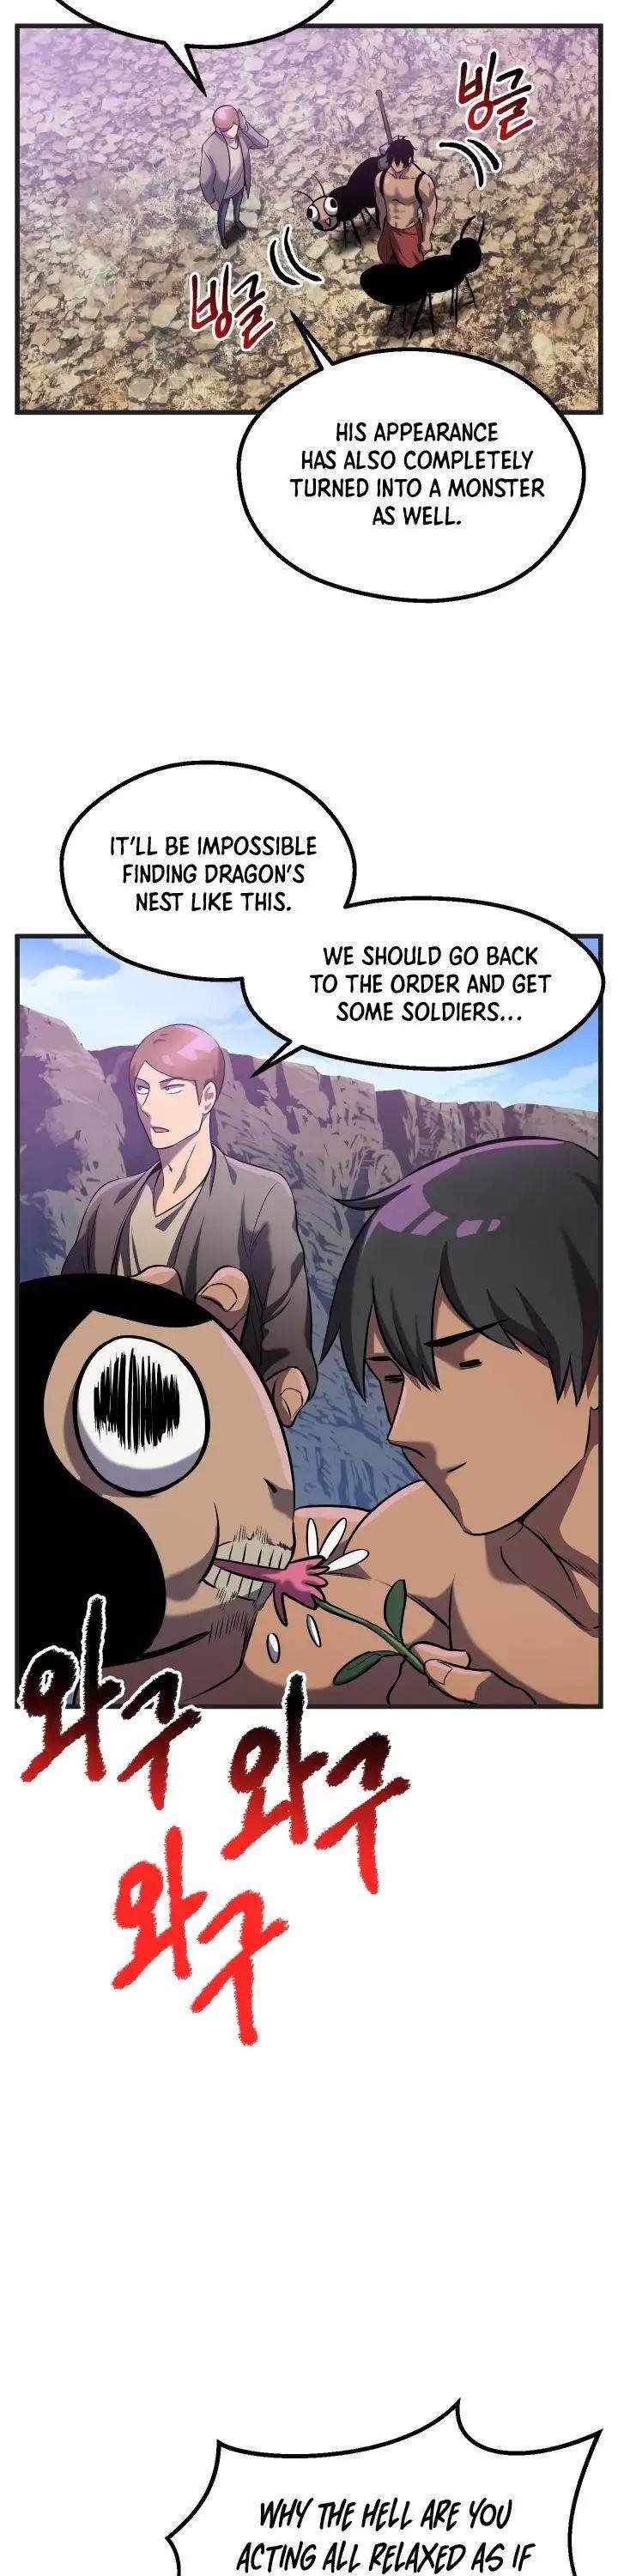 survival-story-of-a-sword-king-in-a-fantasy-world-chap-38-34